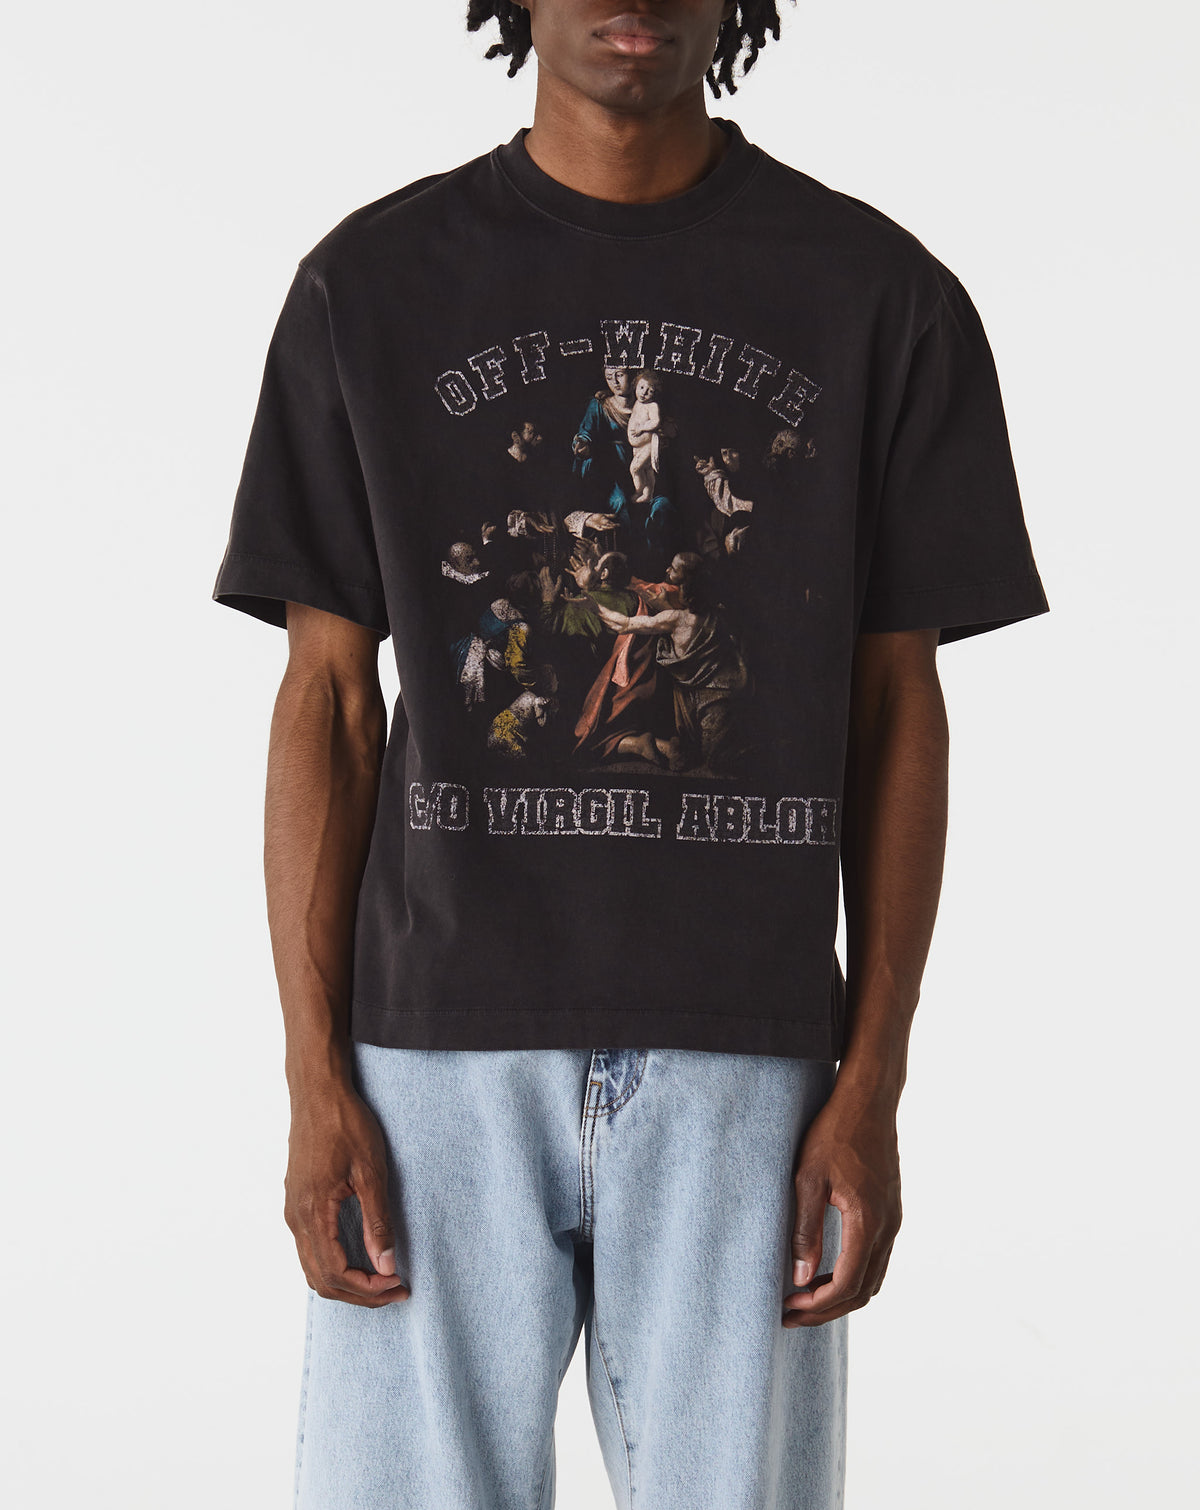 Off-White Mary Skate Short Sleeve T-Shirt - Rule of Next Apparel